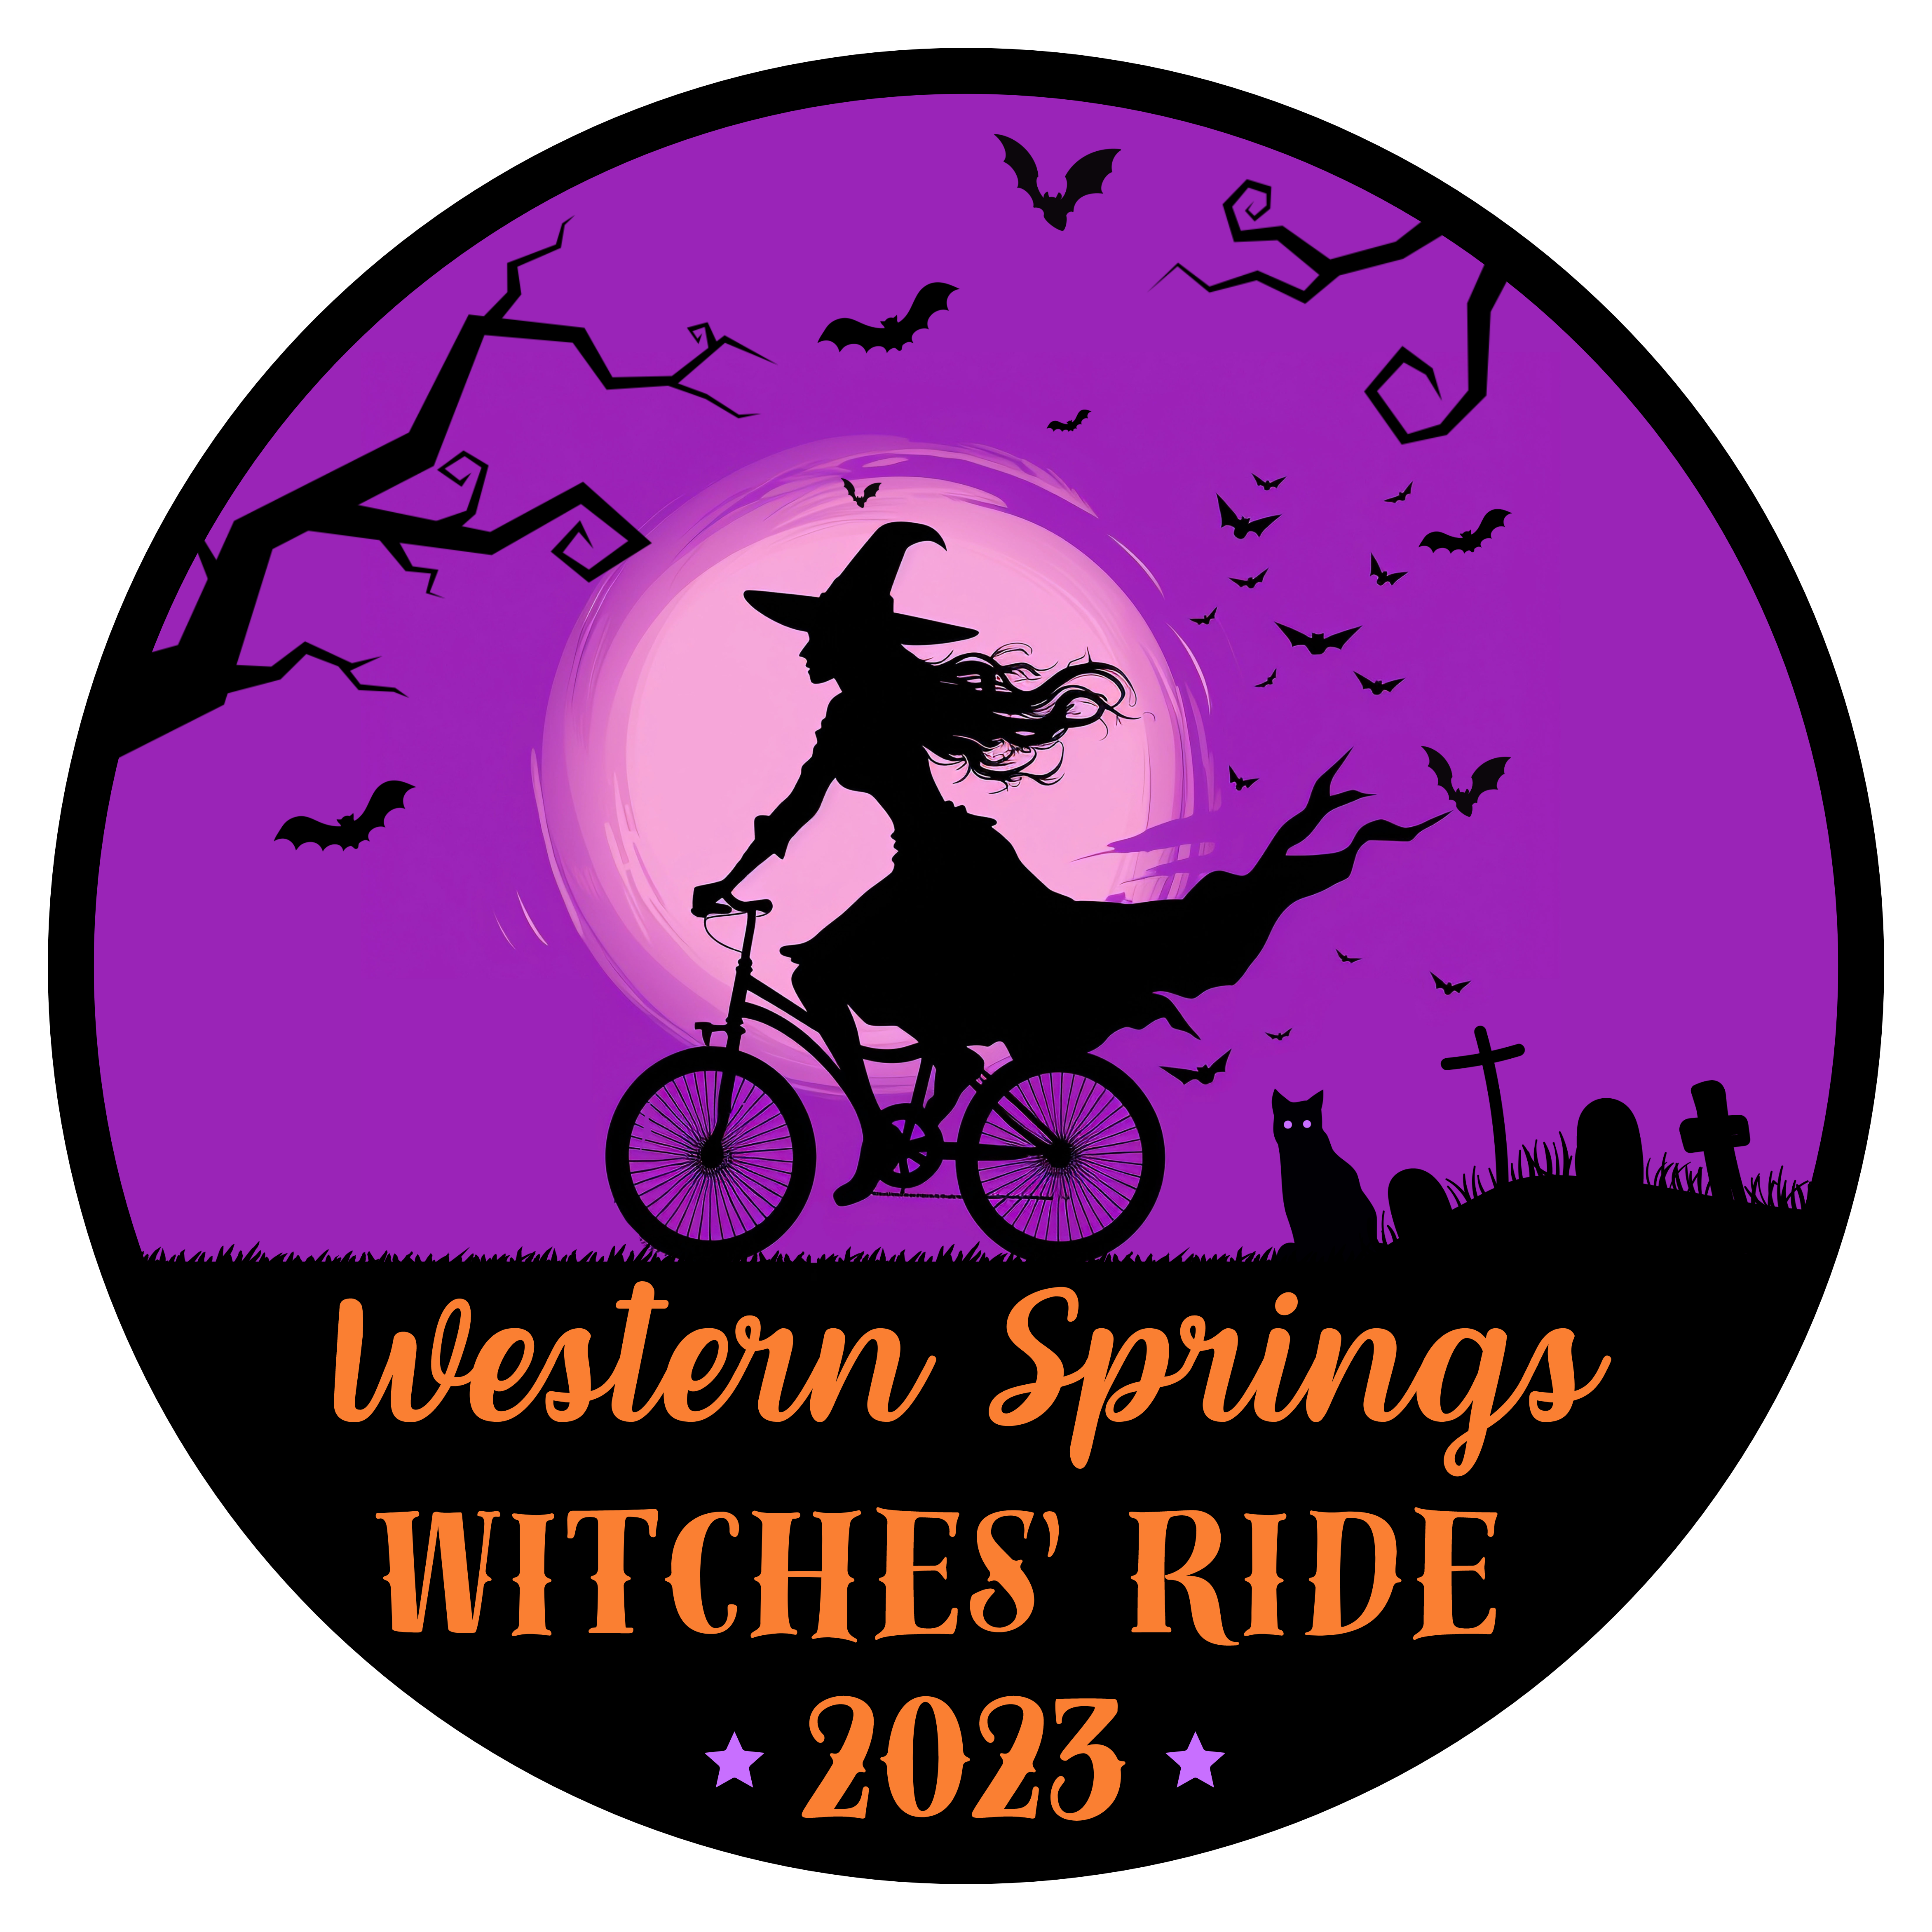 Western Springs Witches